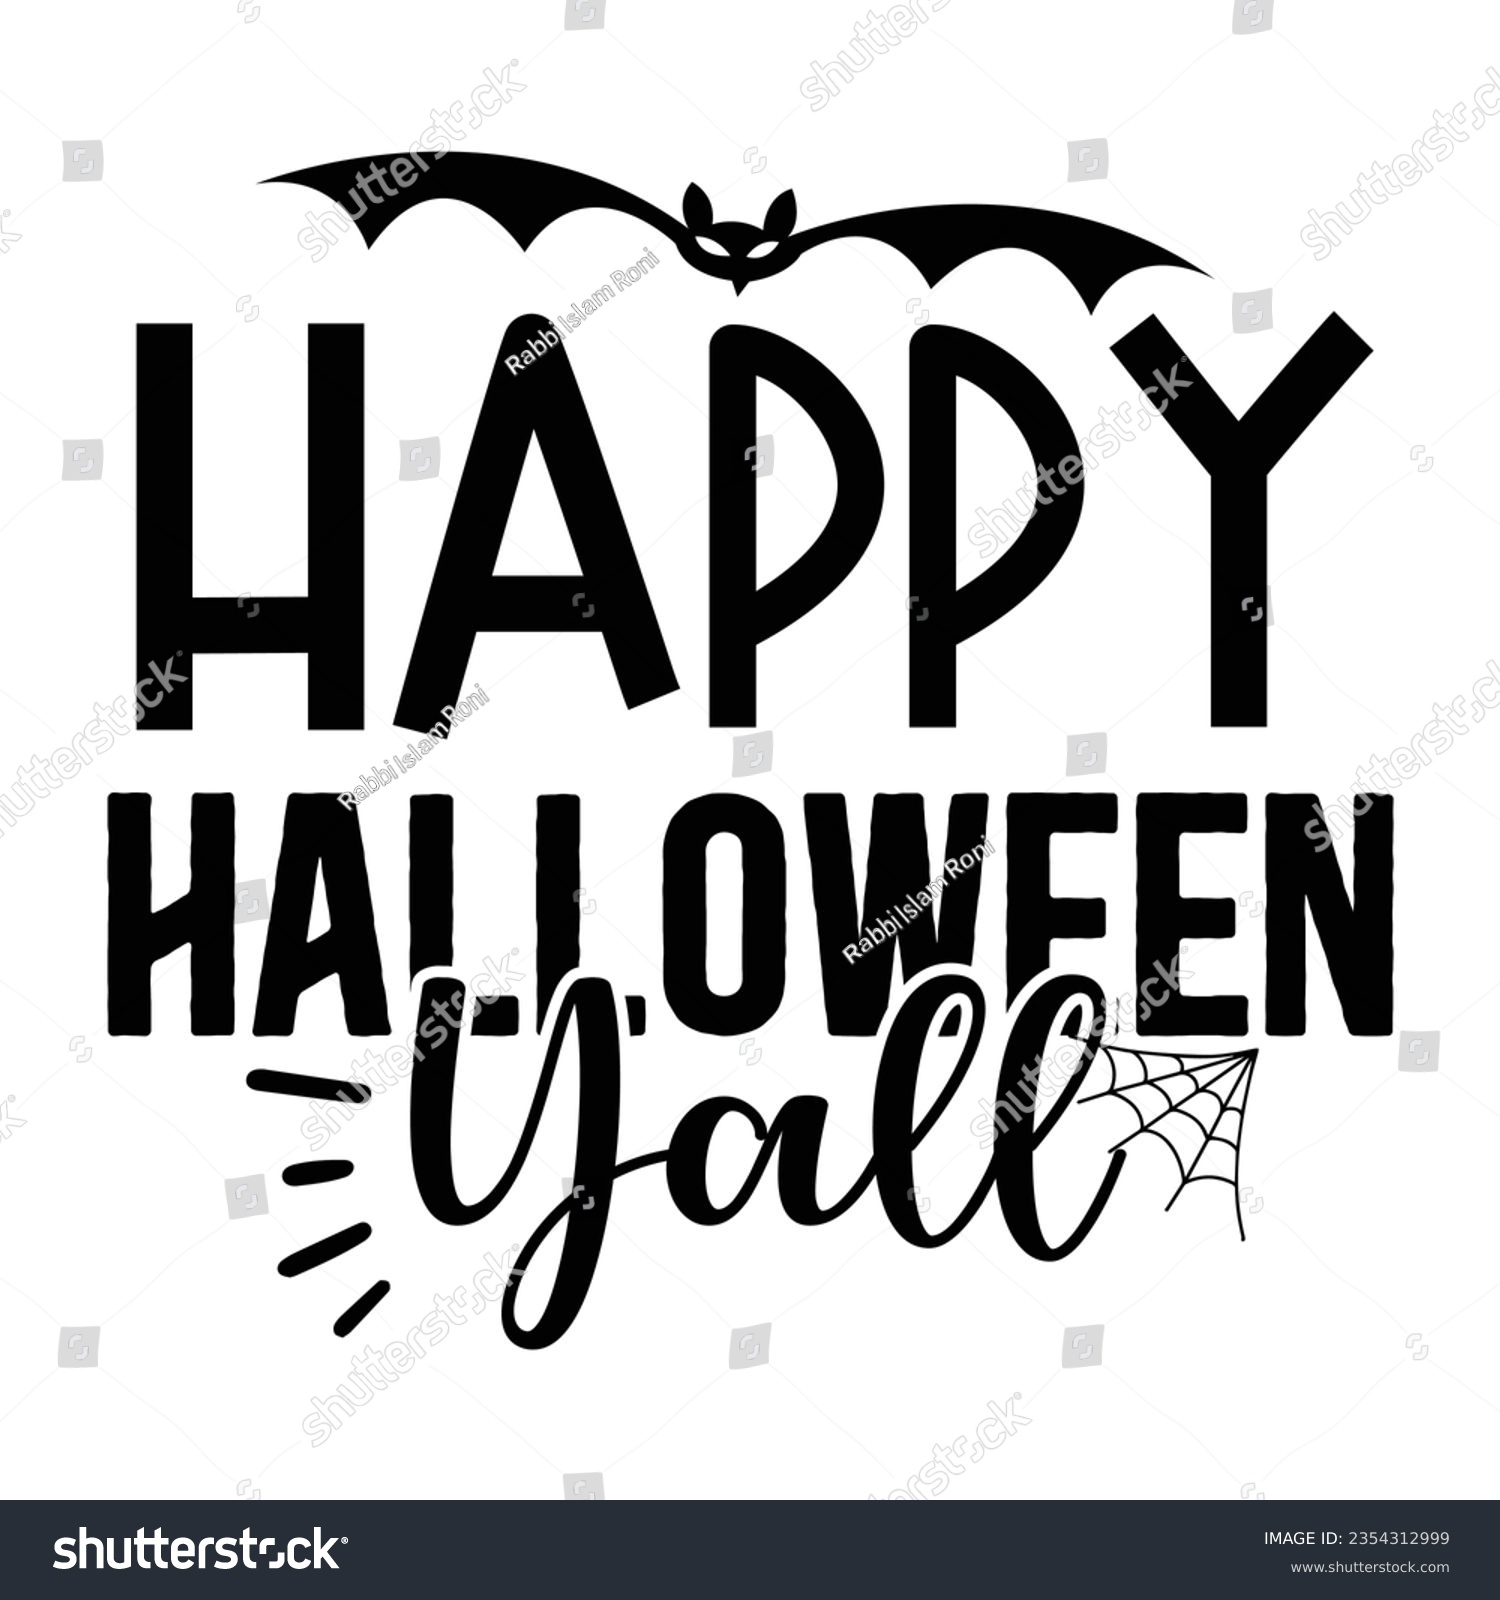 SVG of Happy Halloween Yall, Halloween quotes SVG cut files Design svg